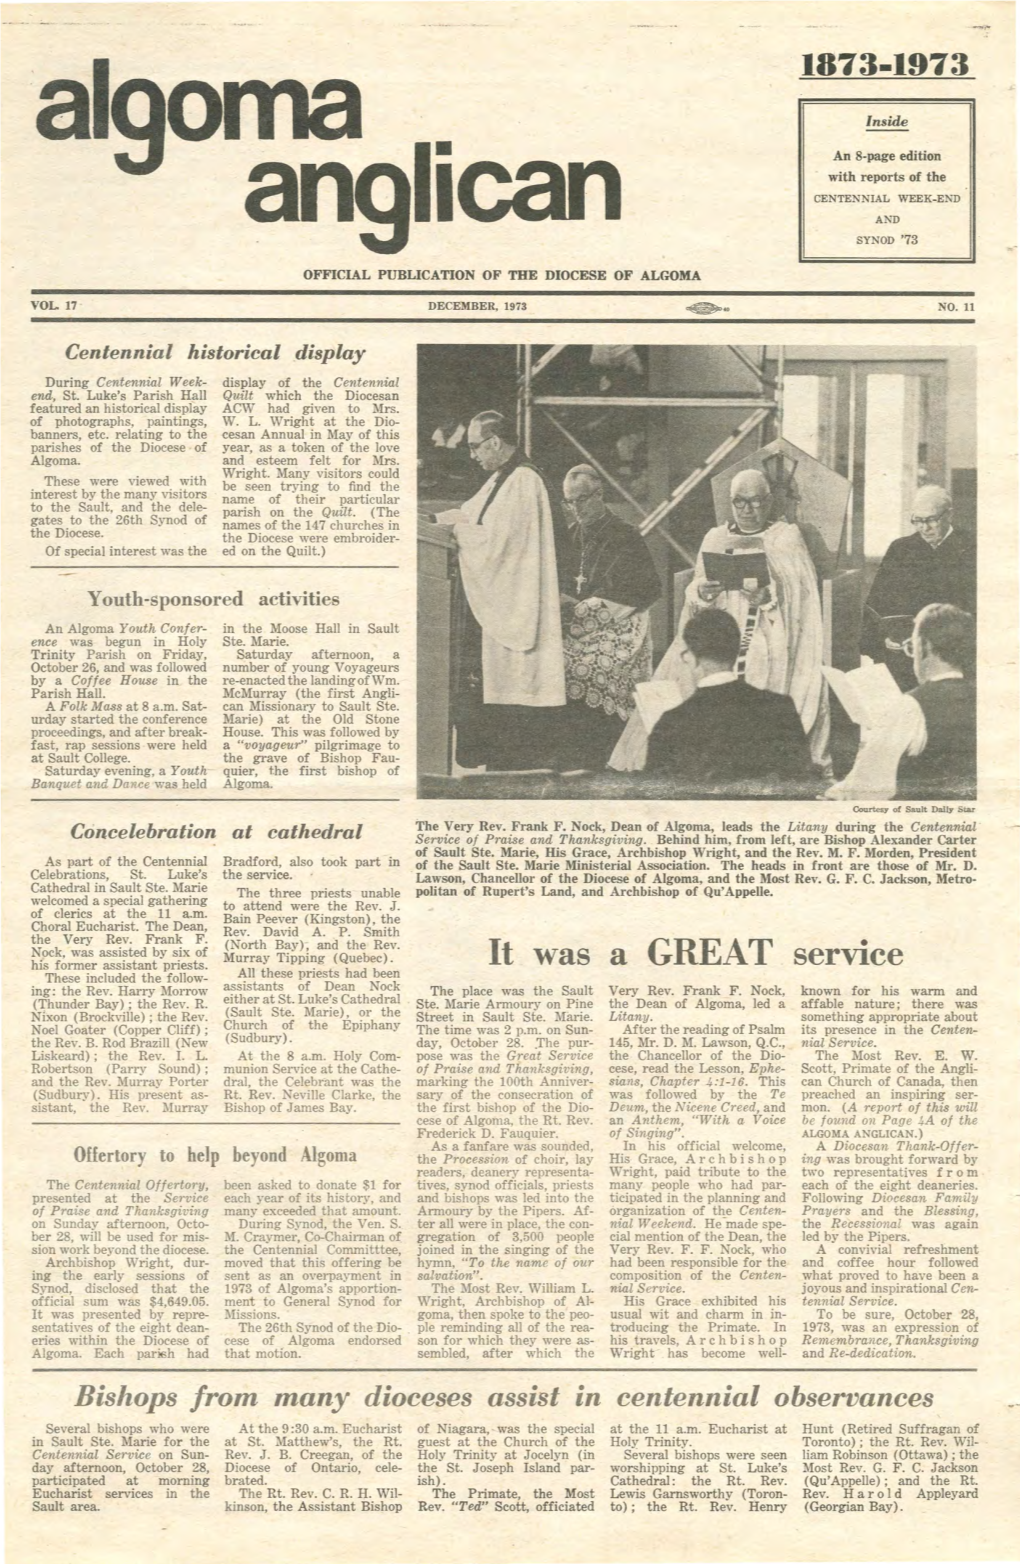 Ition - with Reports of the CENTENNIAL WEEK-END and SYNOD '73